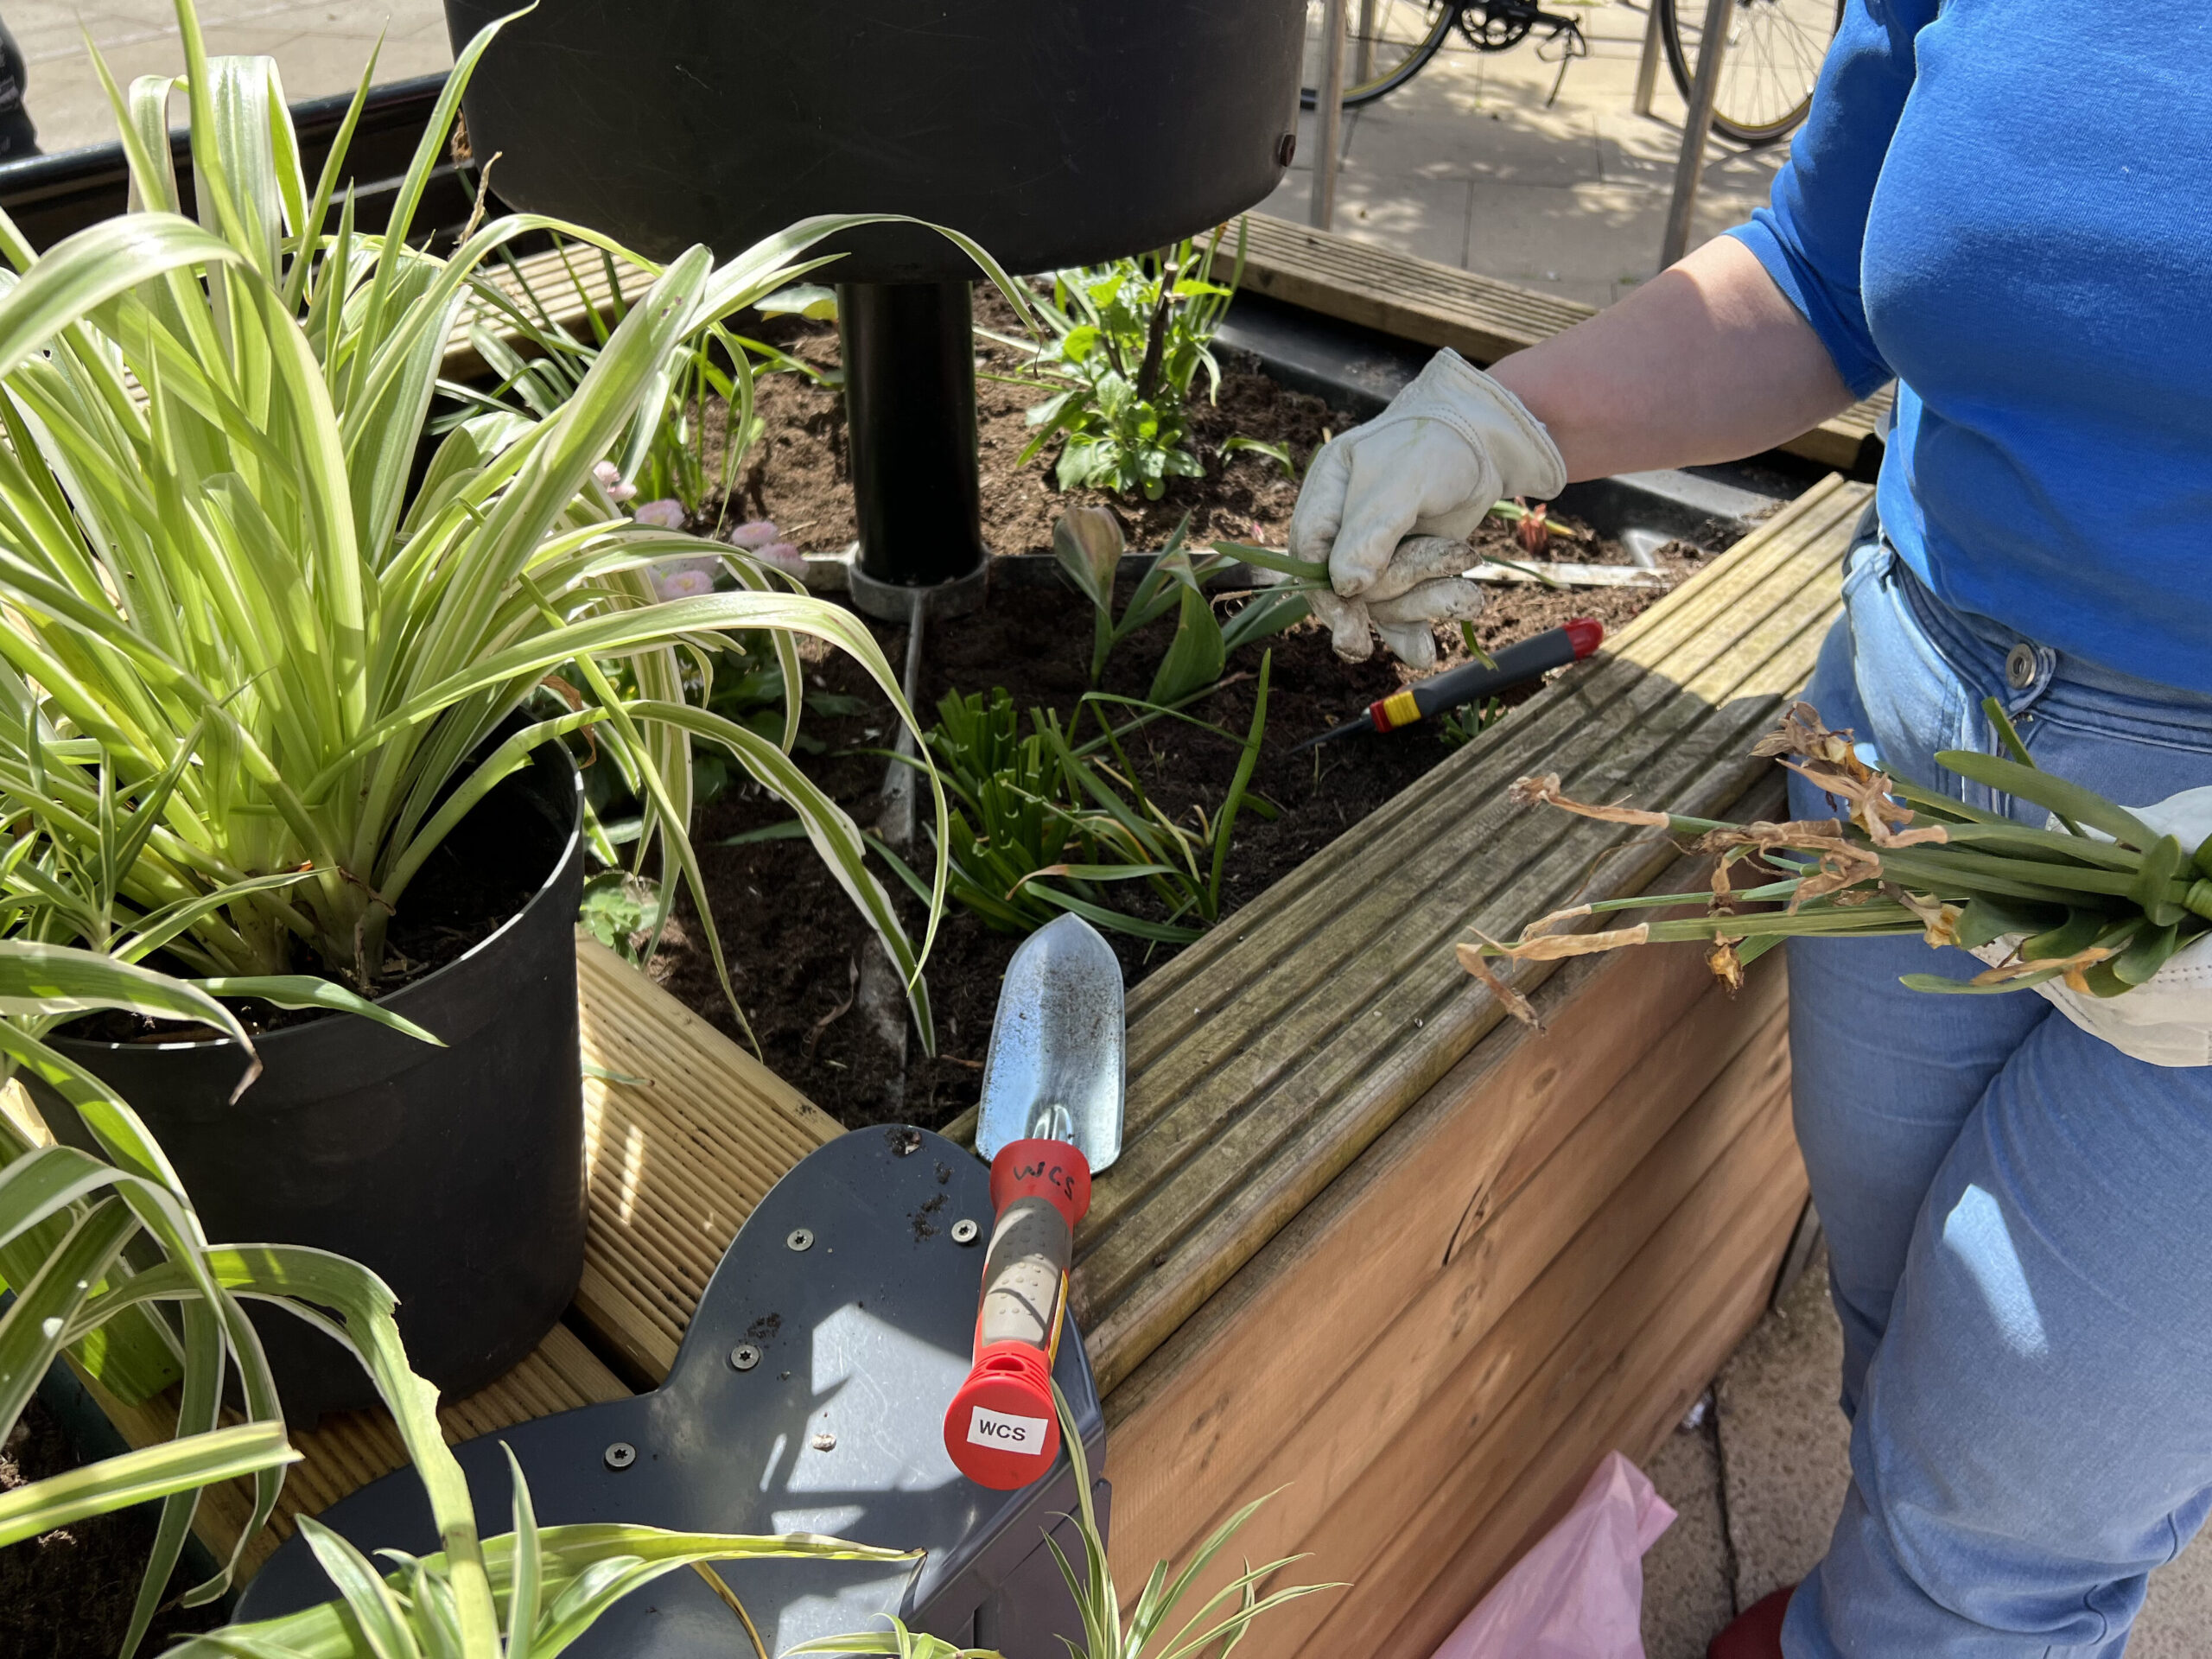 Woman plants flowers in large planter on street with gardening tools for Action day.